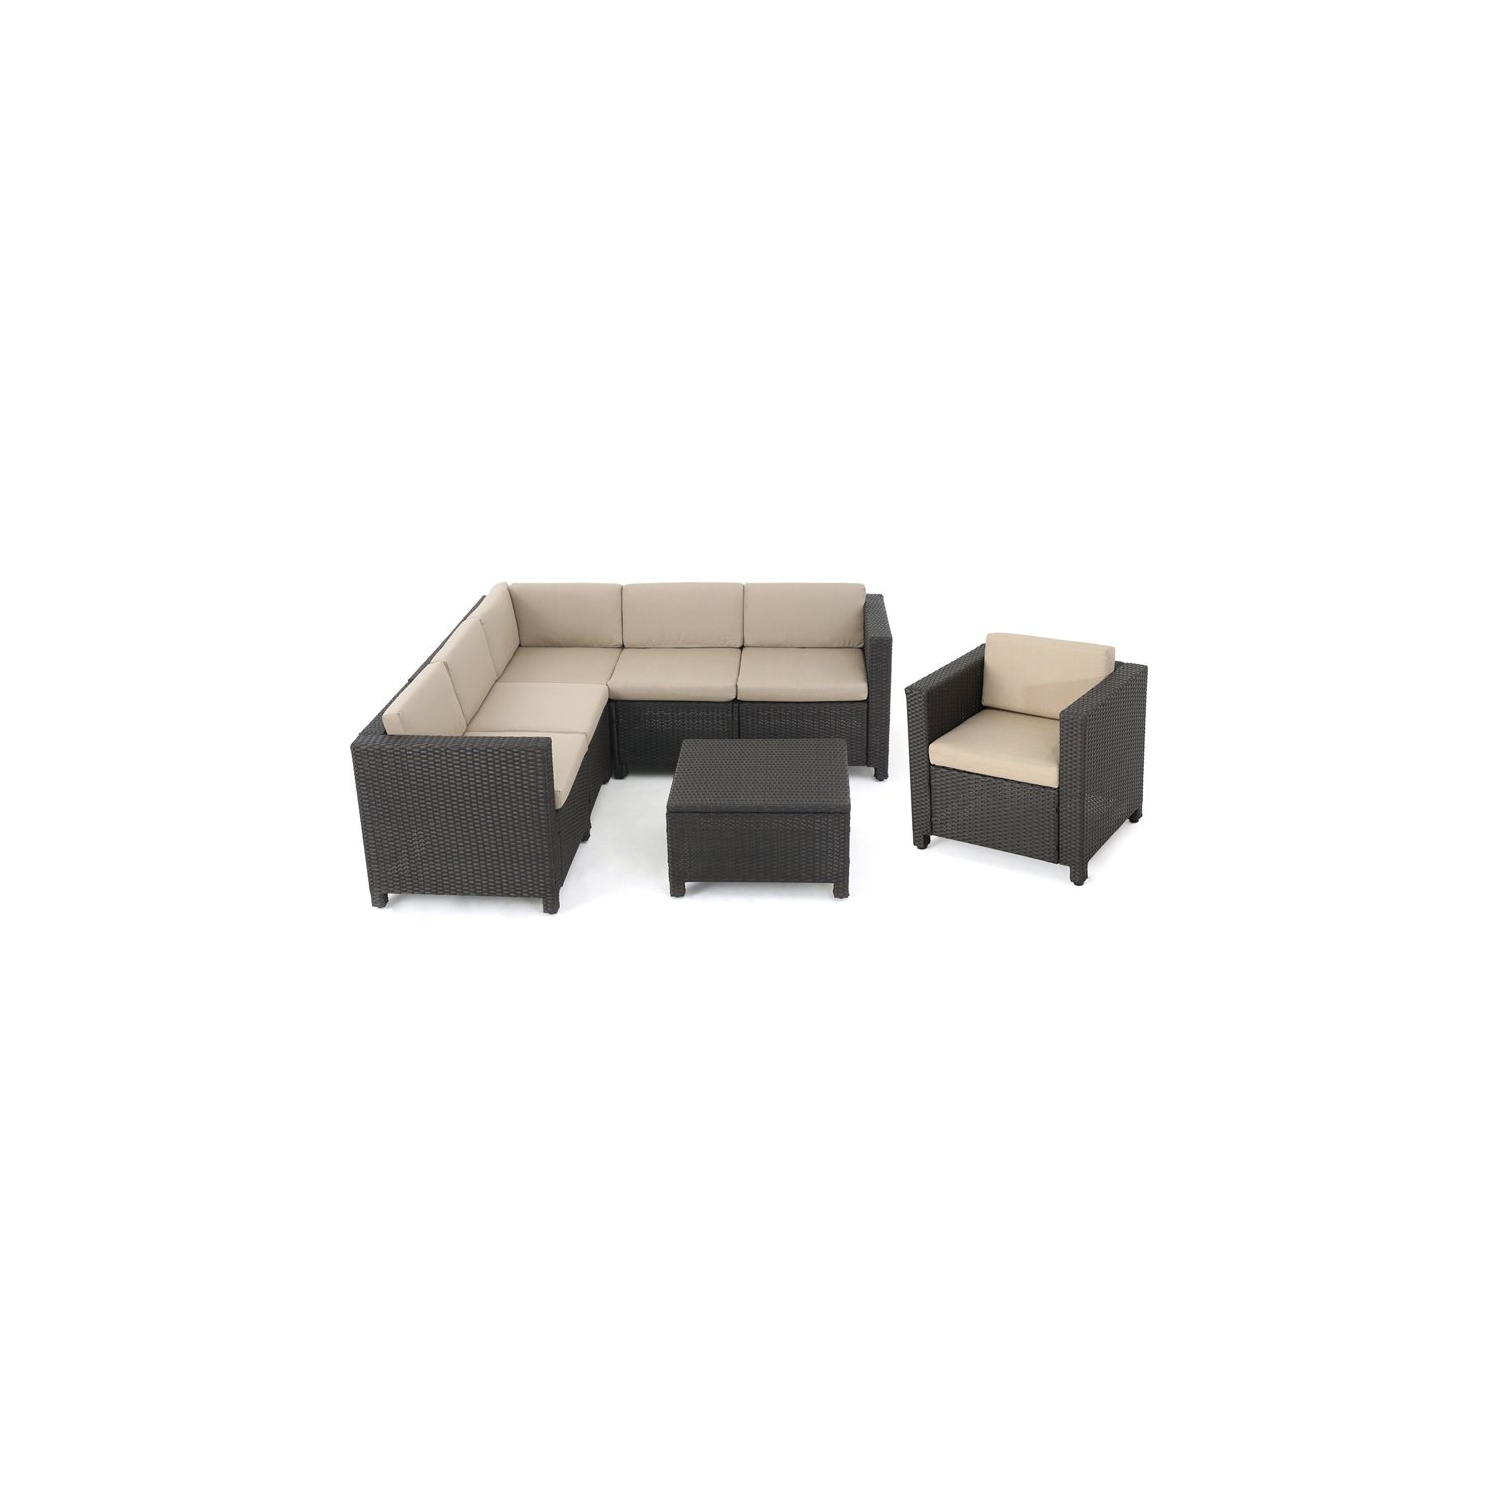 Noble House Puerta Outdoor Dark Brown Wicker V-Shaped Sectional Sofa Set